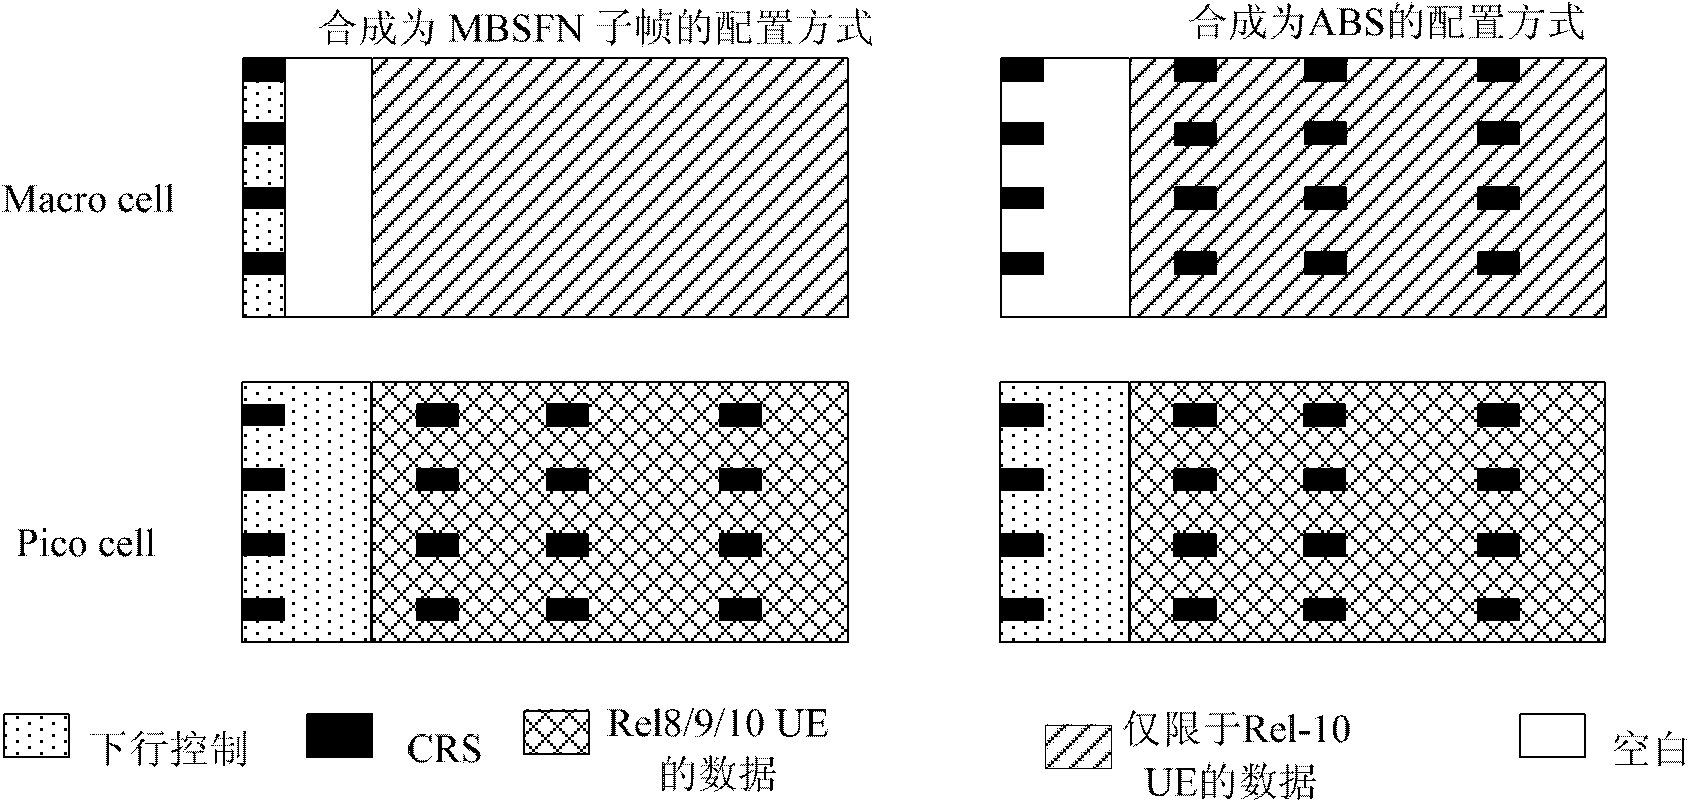 Adjustment method for almost blank subframe (ABS) pattern in heterogeneous network